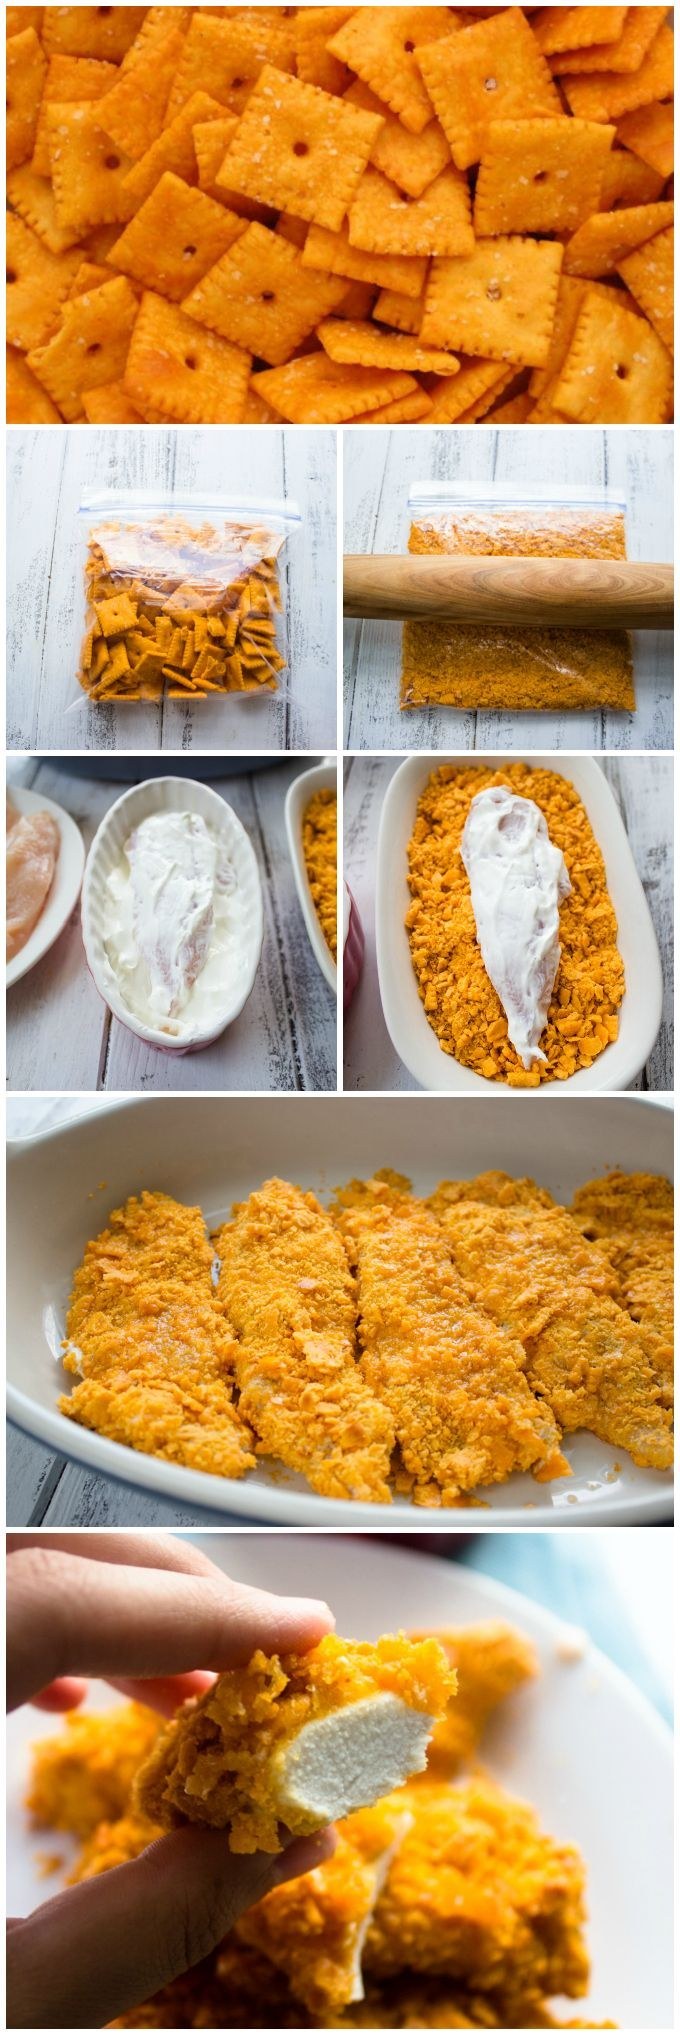 26 Delicious Ways To Eat Chicken Tenders